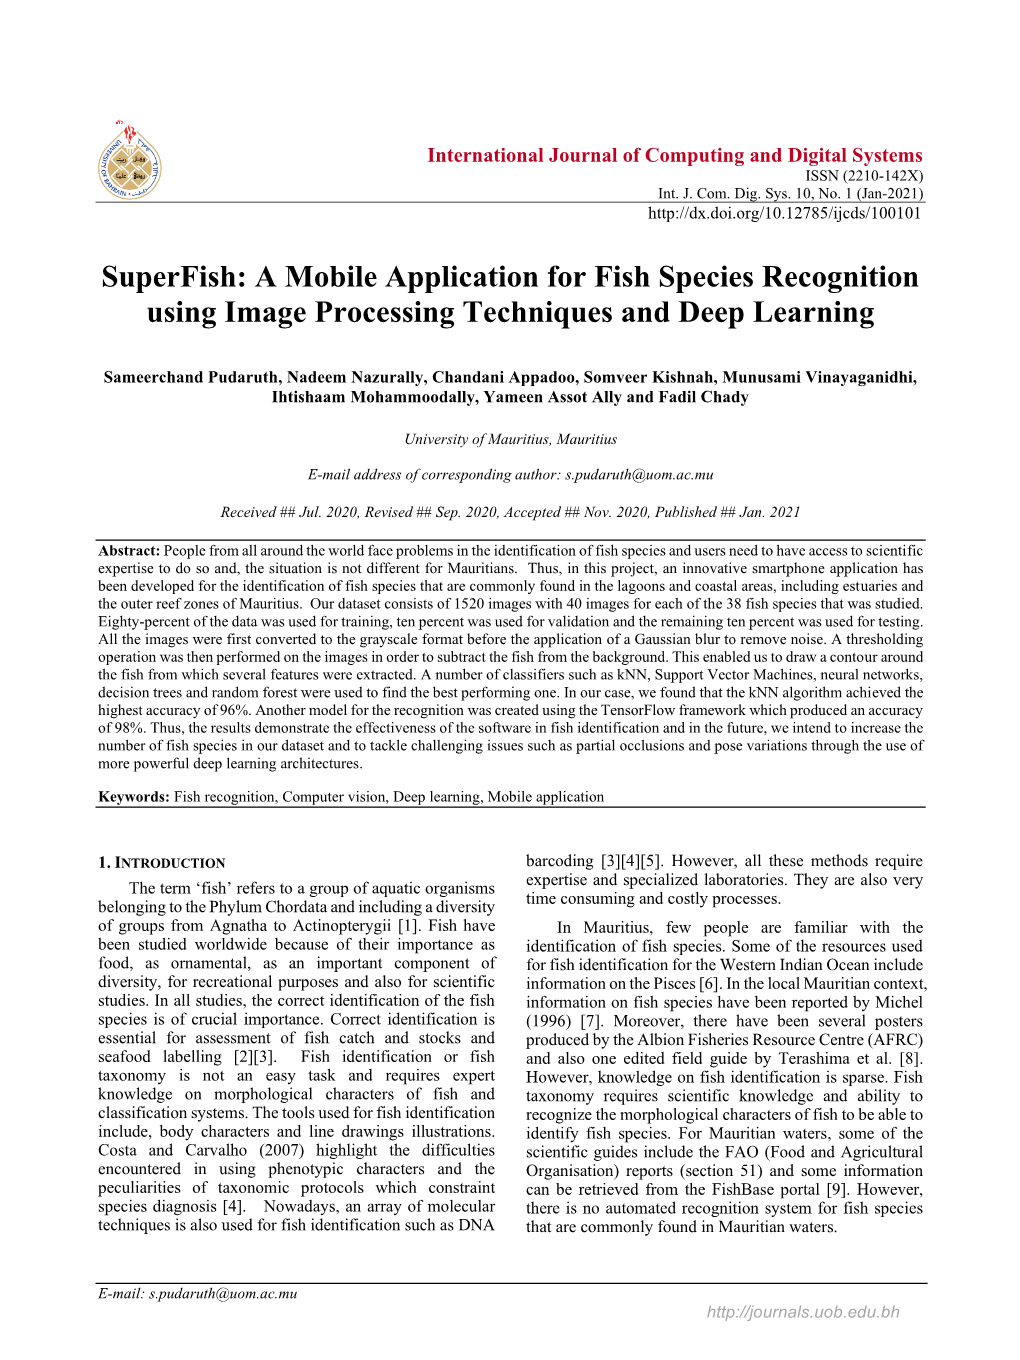 A Mobile Application for Fish Species Recognition Using Image Processing Techniques and Deep Learning